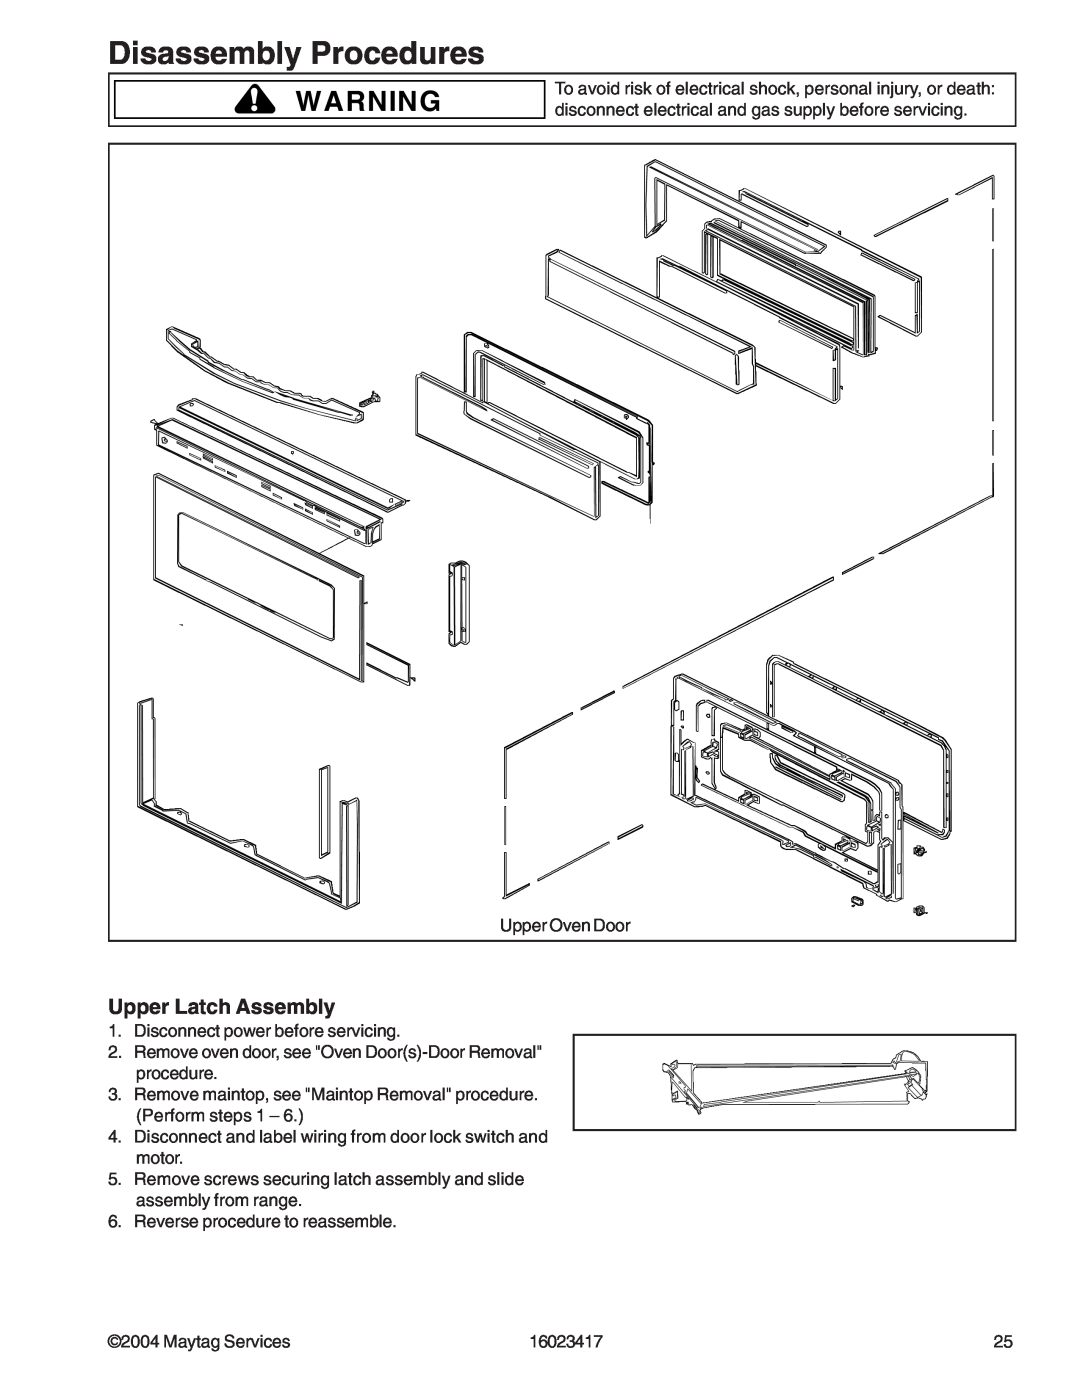 Jenn-Air JDR8895AAB/S/W, JDR8895ACS/W manual Upper Latch Assembly, Disassembly Procedures 